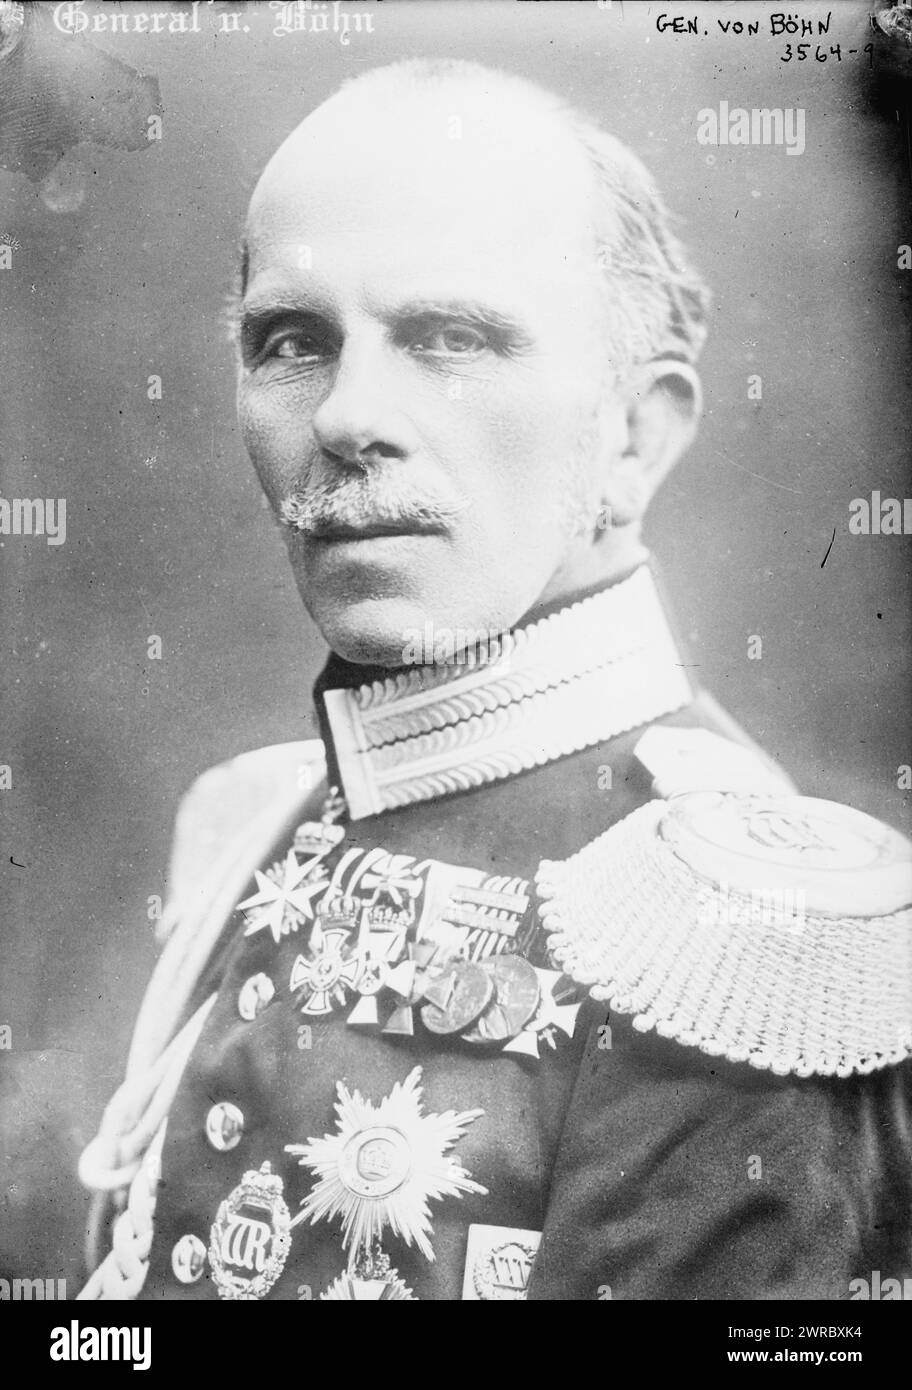 General von Hohn, Photograph shows Maximilian Ritter von Höhn, who was an officer in the German Army during World War I., between ca. 1910 and ca. 1915, Glass negatives, 1 negative: glass Stock Photo